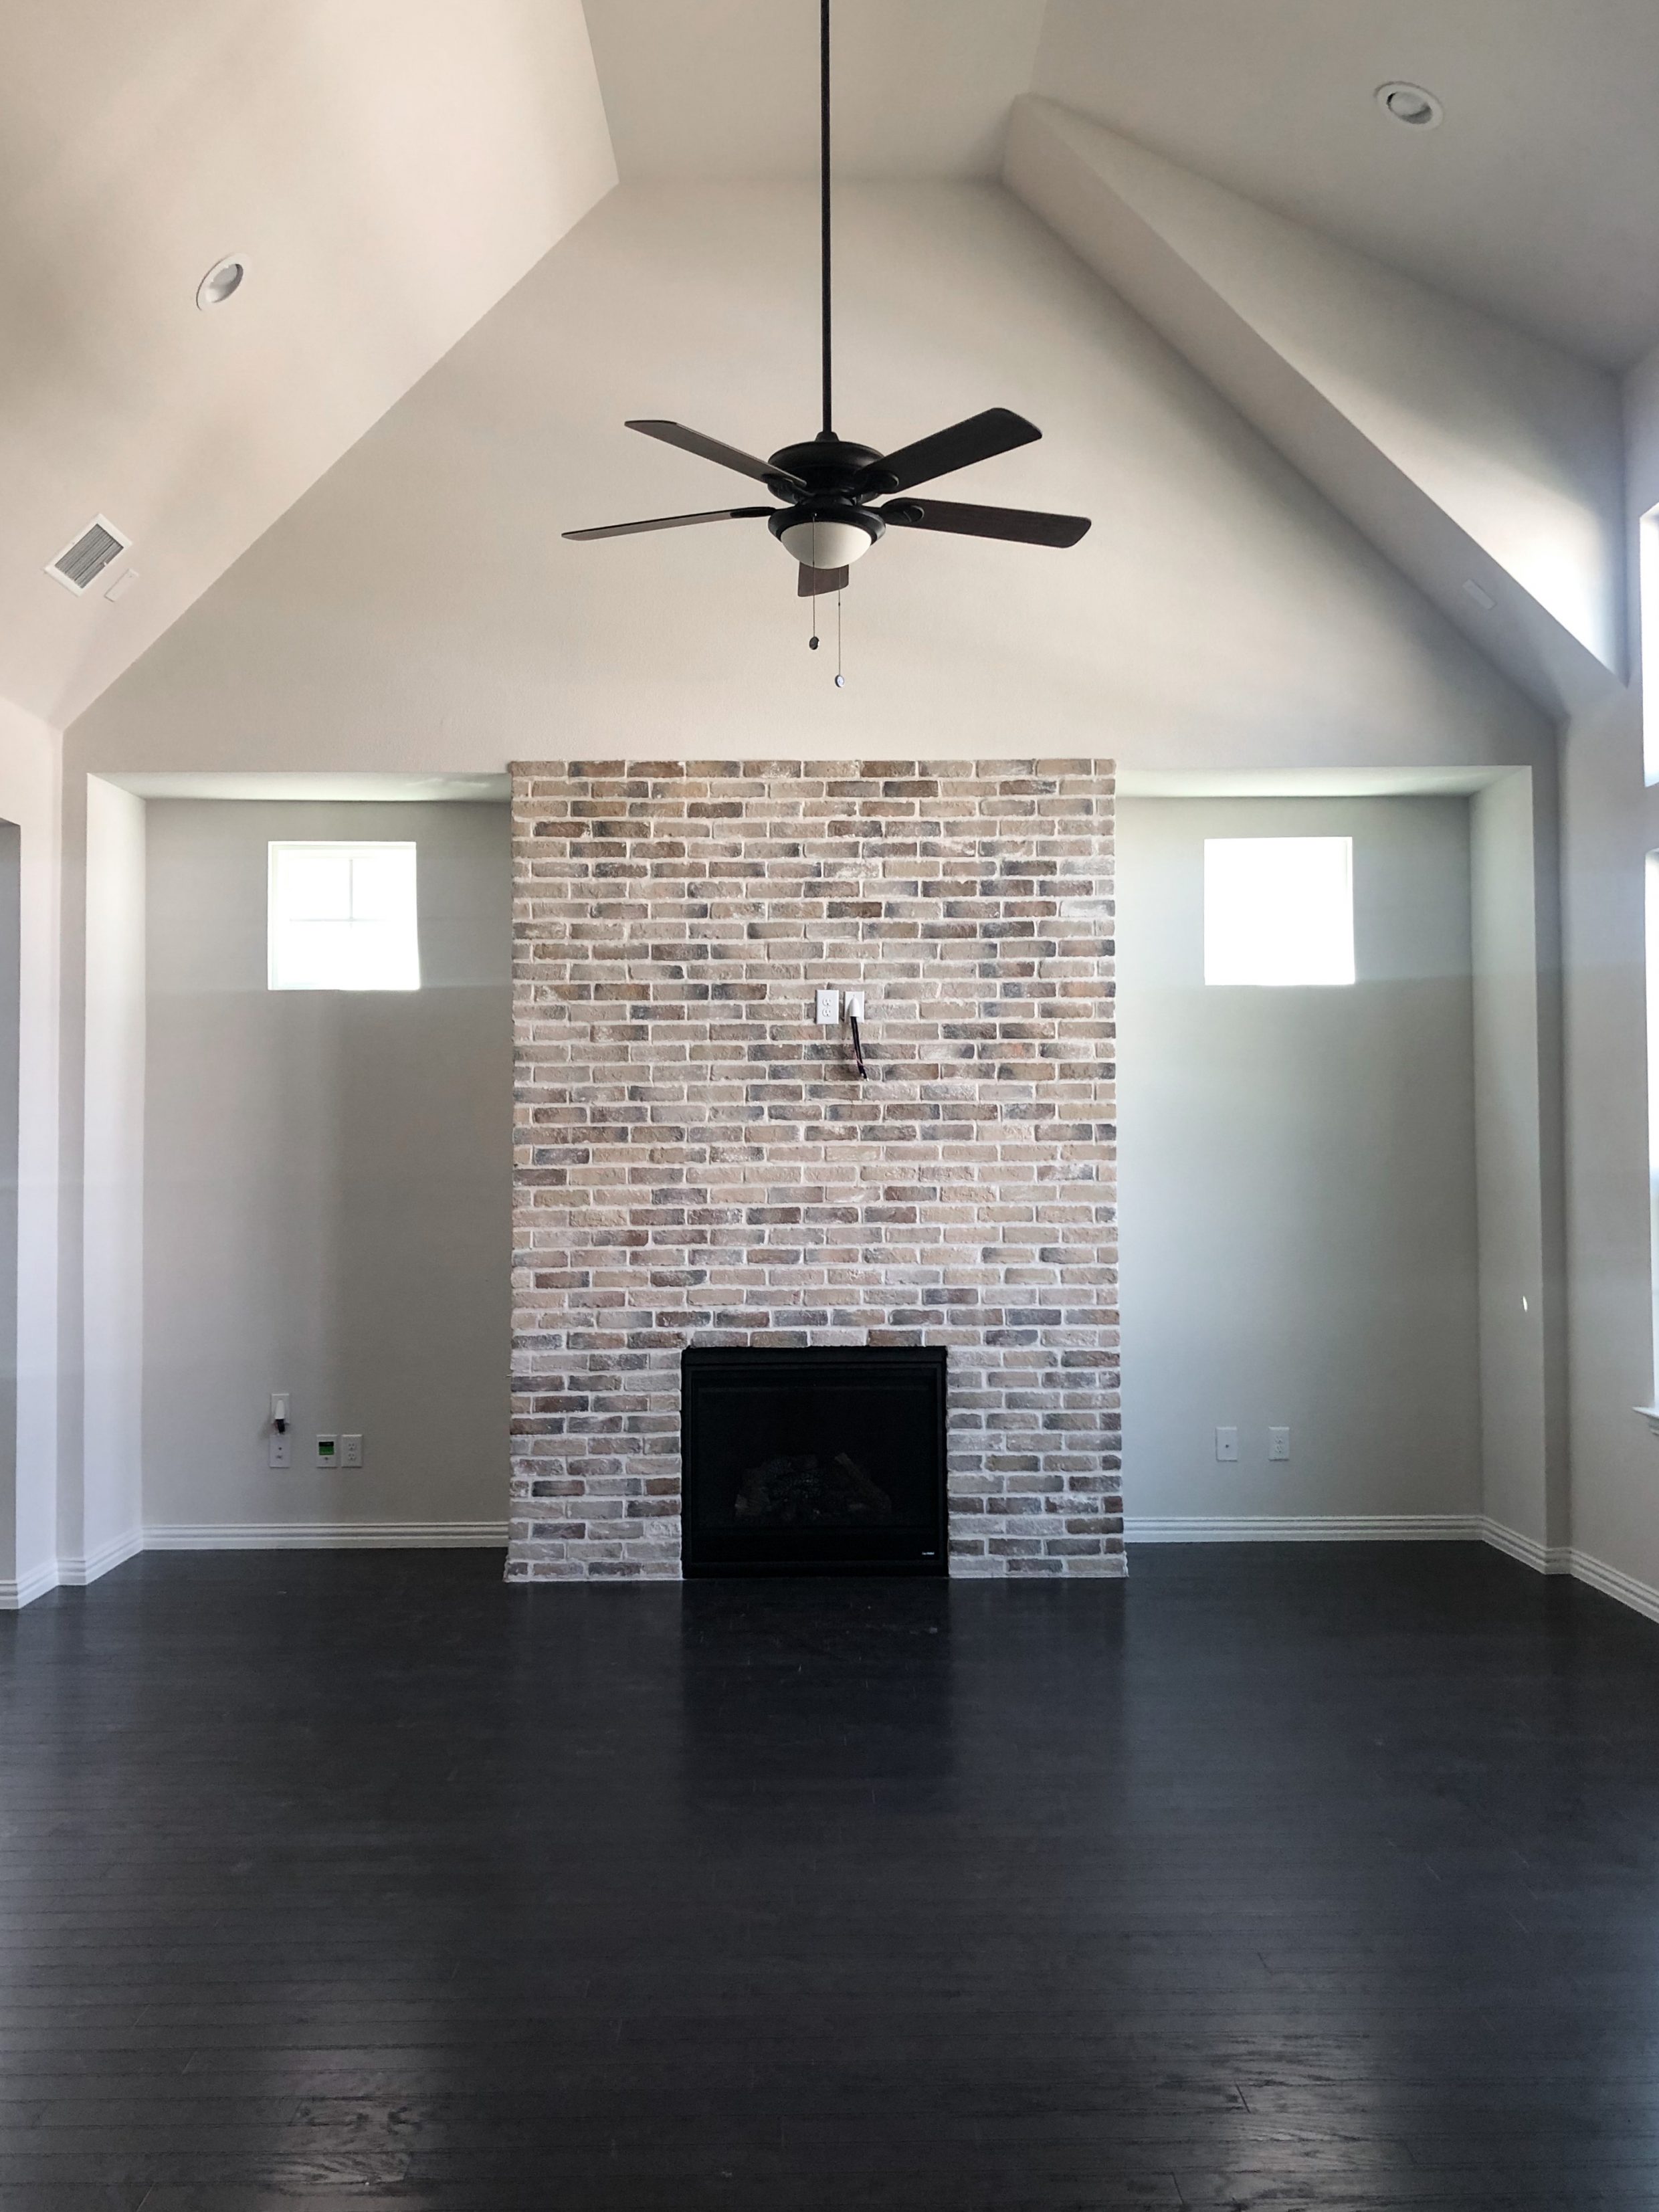 High ceiling living room with brick fireplace and black fan new build house